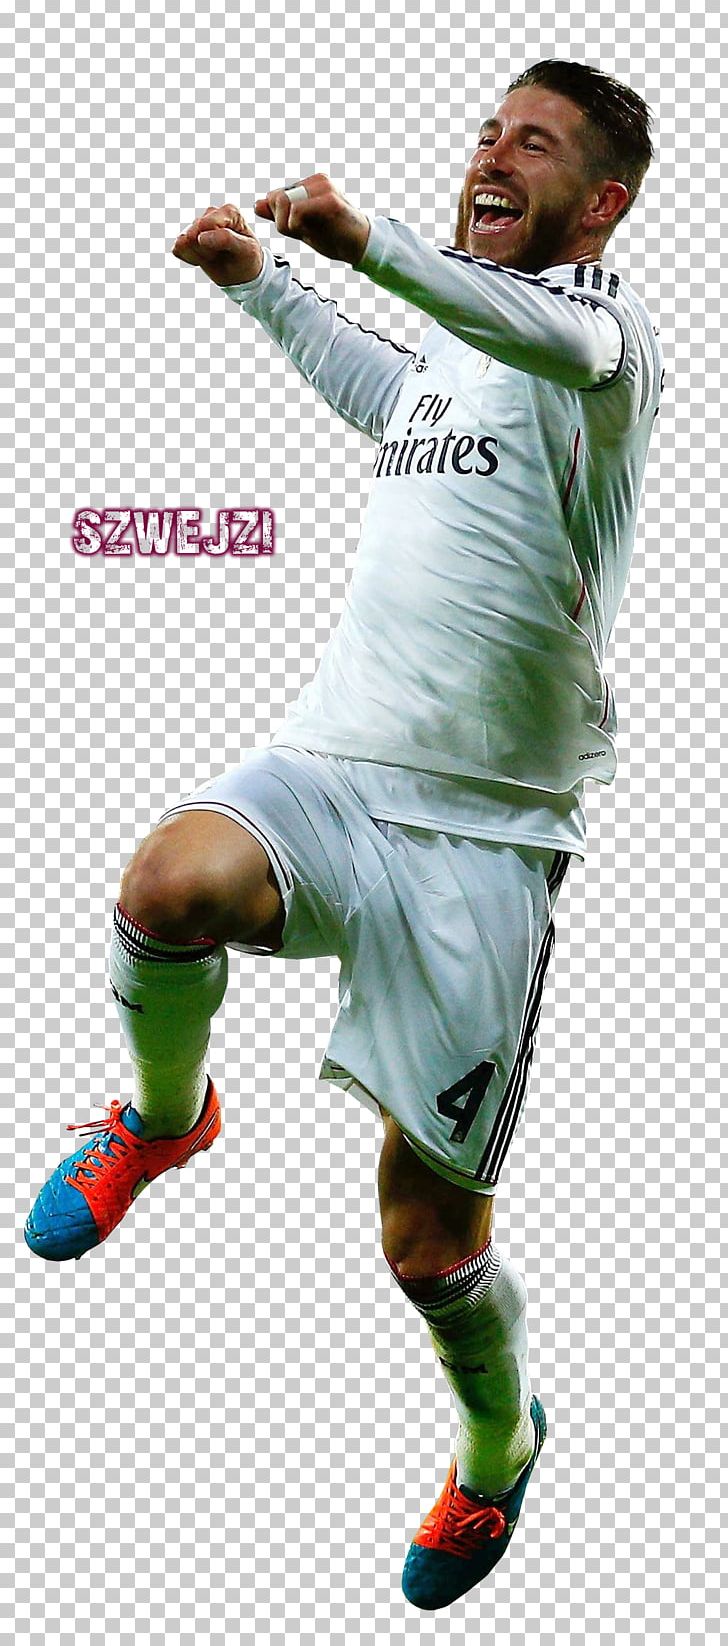 Sergio Ramos Spain National Football Team Football Player PNG, Clipart, Andres Iniesta, Ball, Competition Event, Desktop Wallpaper, Football Free PNG Download